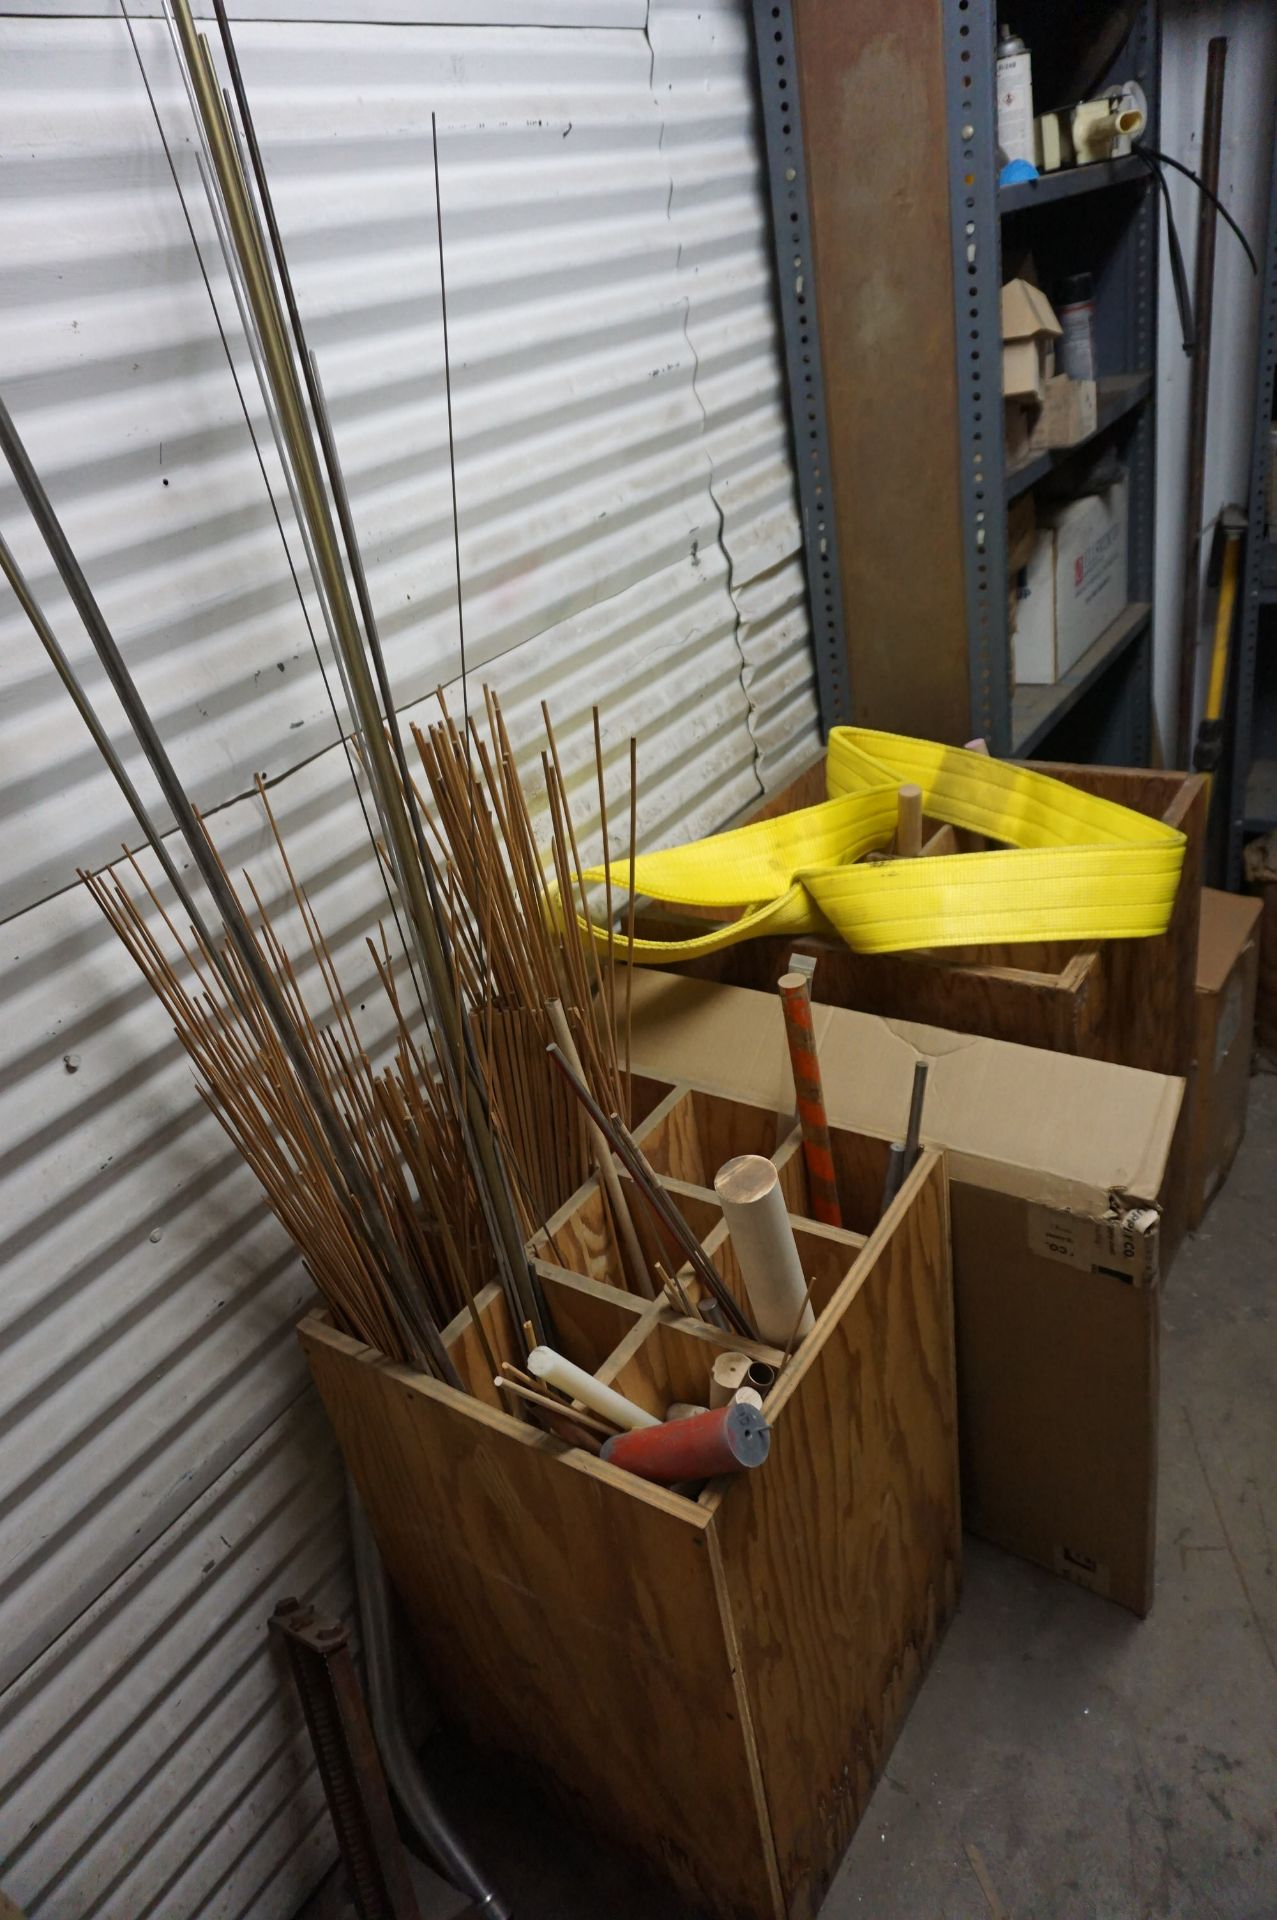 CONTENTS OF STORAGE ROOM TO INCLIDE: MISC. HARDWARE, APPLICATORS, PPE, ETC. **Rigging provided - Image 5 of 7